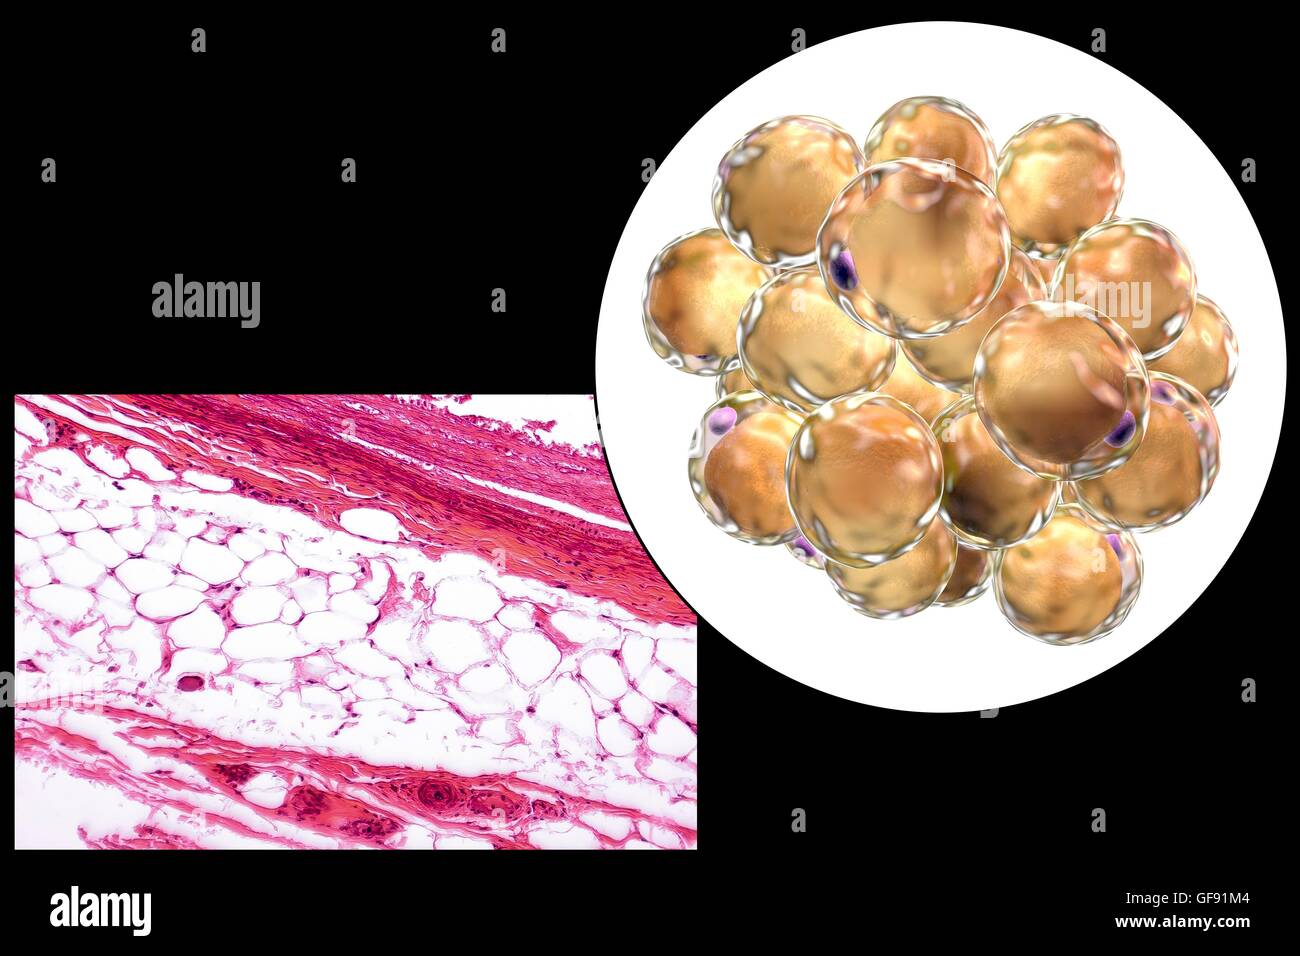 Fat cells, light micrograph and computer illustration. White adipose tissue composed of adipocytes (fat cells). Adipocytes form adipose tissue, which stores energy as an insulating layer of fat. White adipose tissue is used as a store of energy but also a Stock Photo